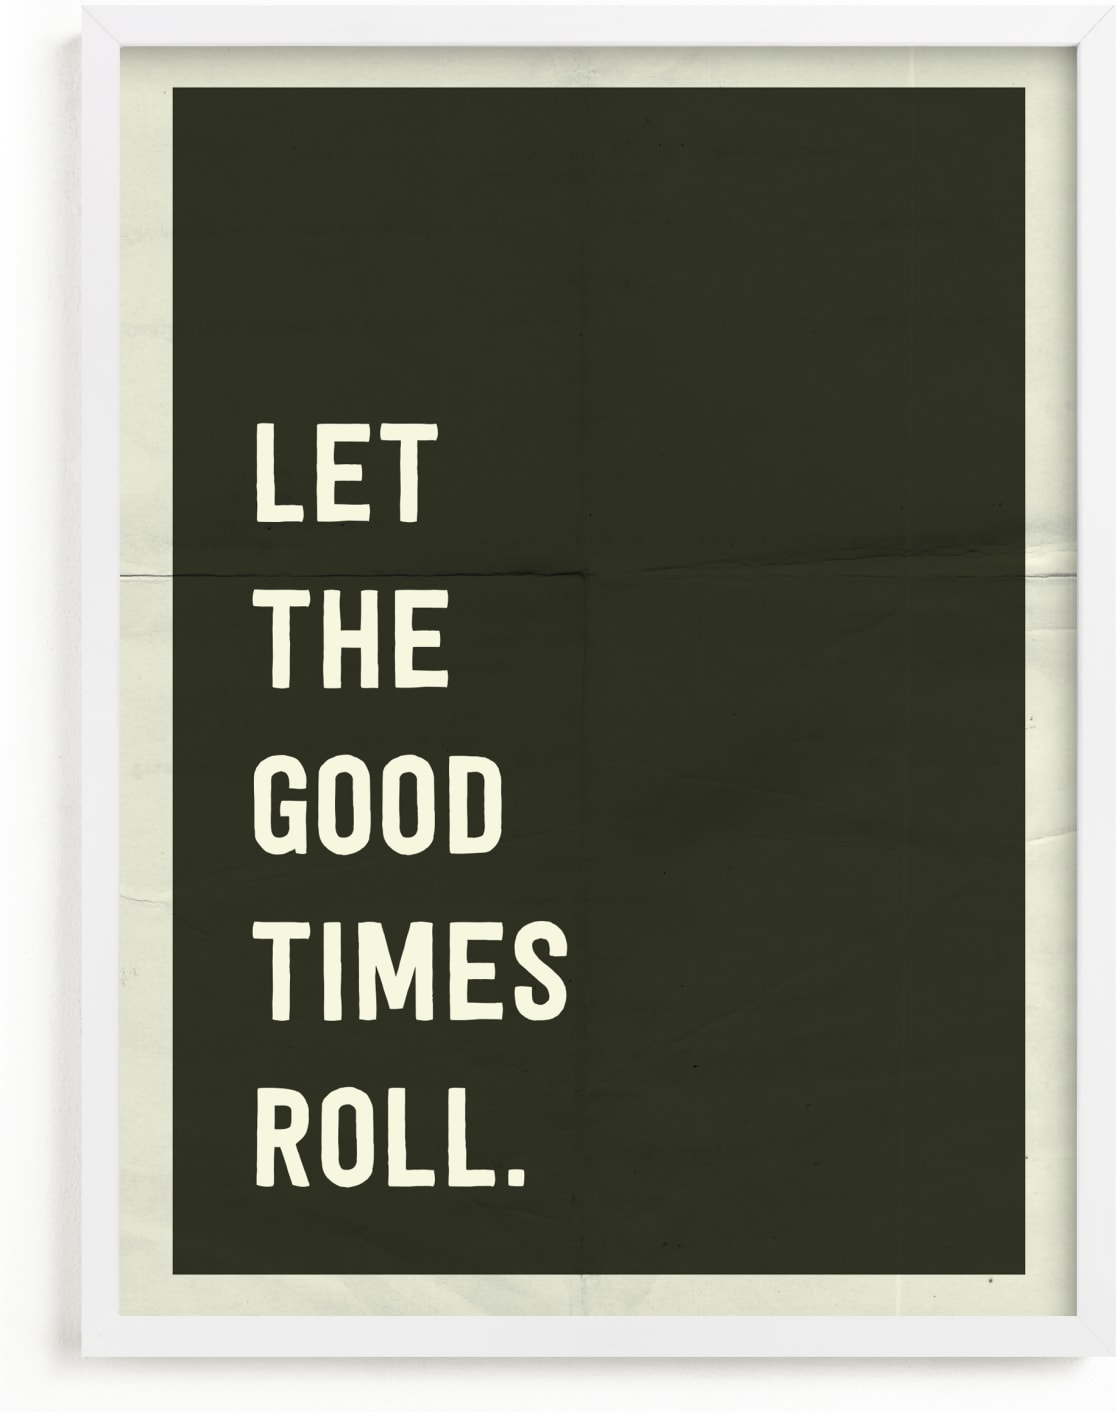 This is a grey art by Morgan Kendall called Let the Good Times Roll.